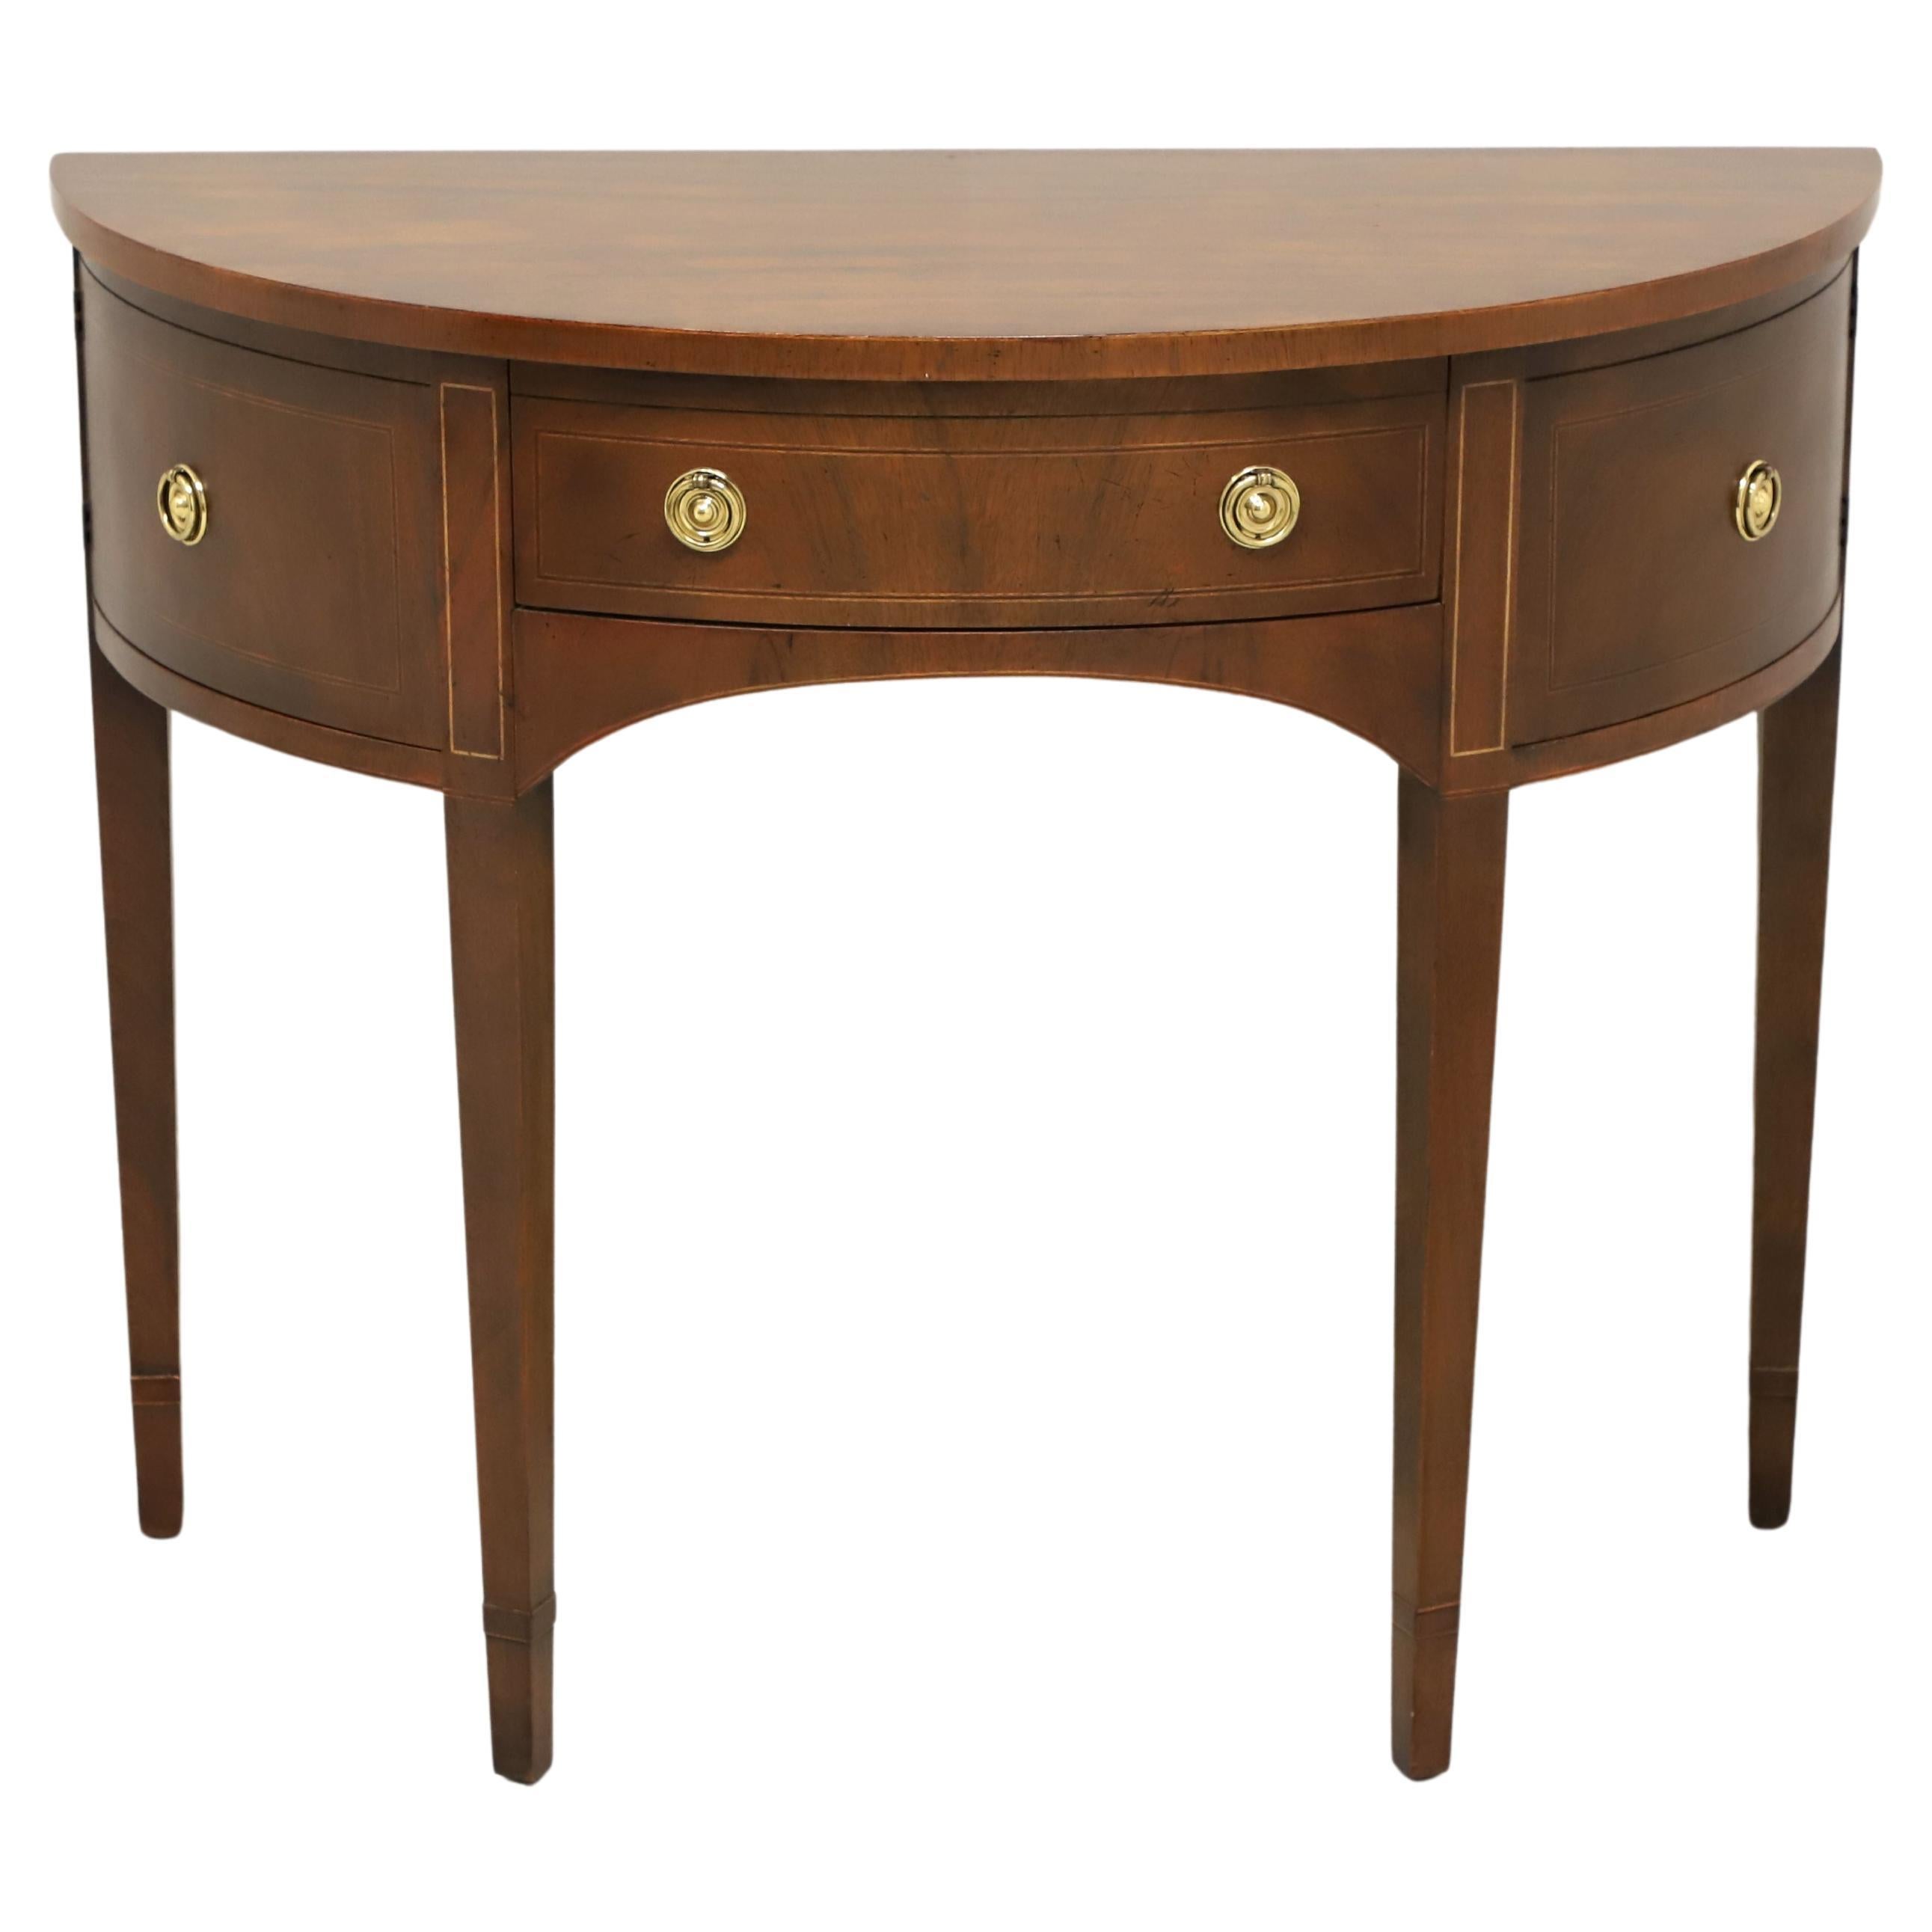 BAKER Inlaid Mahogany Hepplewhite Demilune Console Table / Server - A